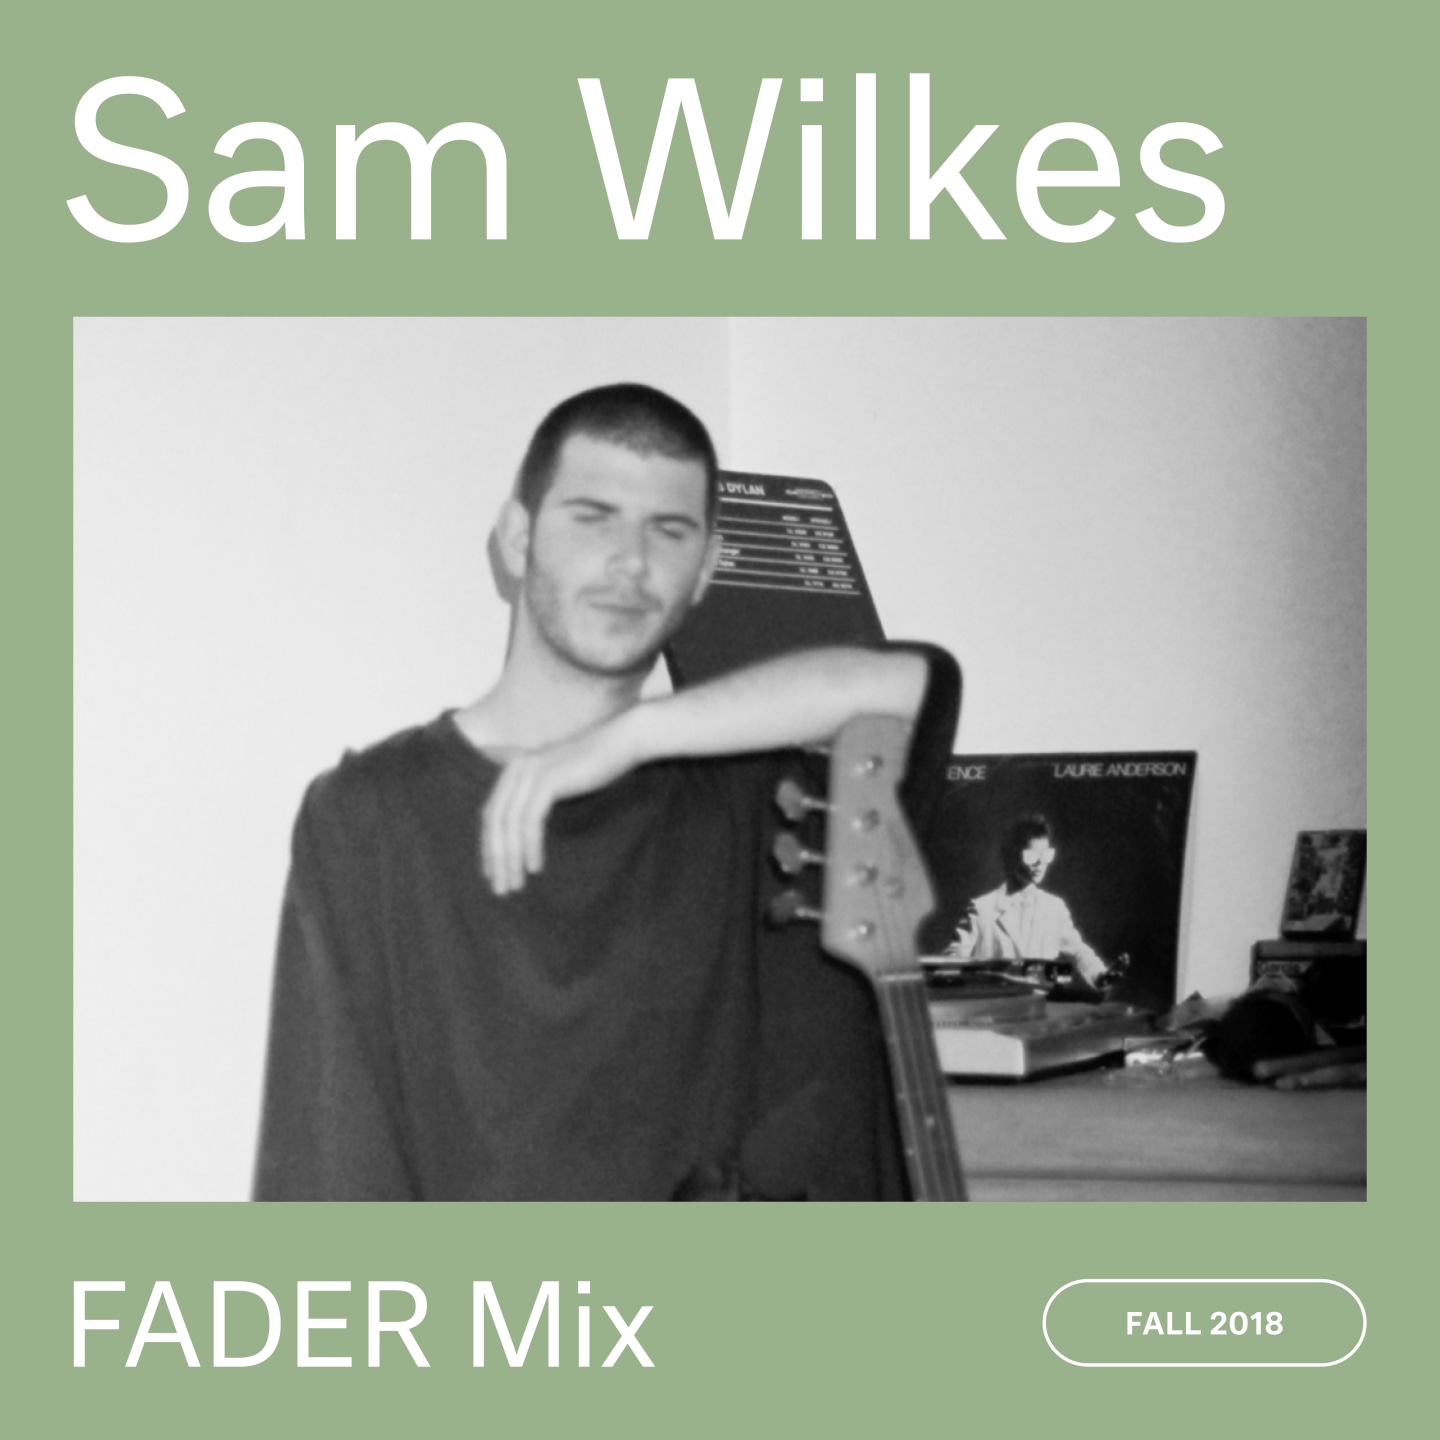 Listen to a new FADER Mix by Sam Wilkes